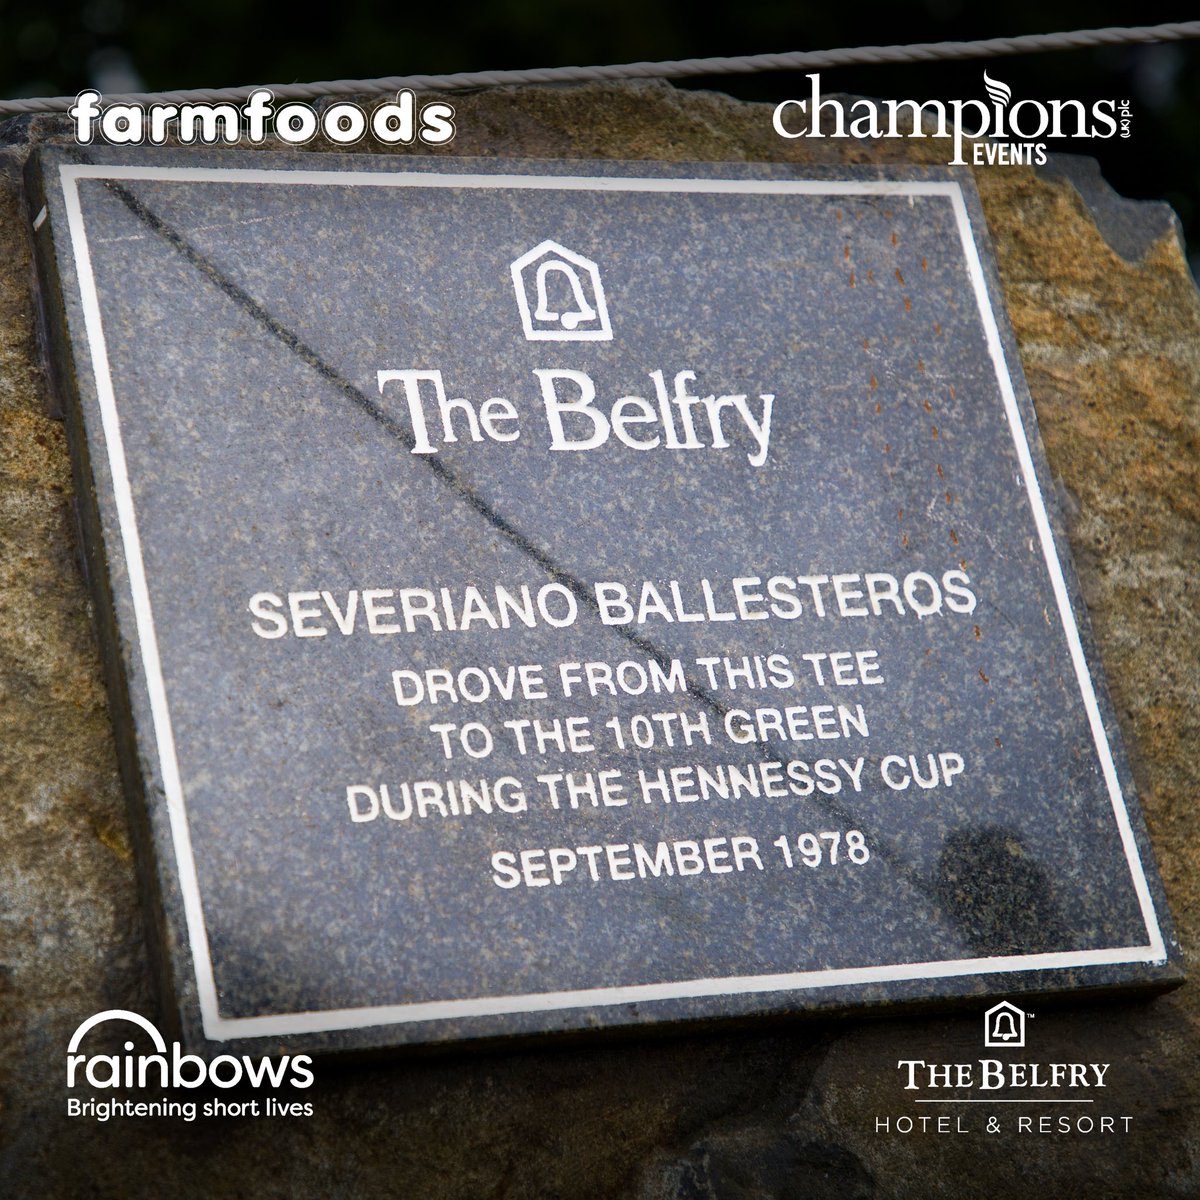 We have arrived @TheBelfryHotel! we are so excited and raring to go! 🏌️‍♀️⛳️ #championsevents #charitygolfday #championsxbelfry #thebelfry